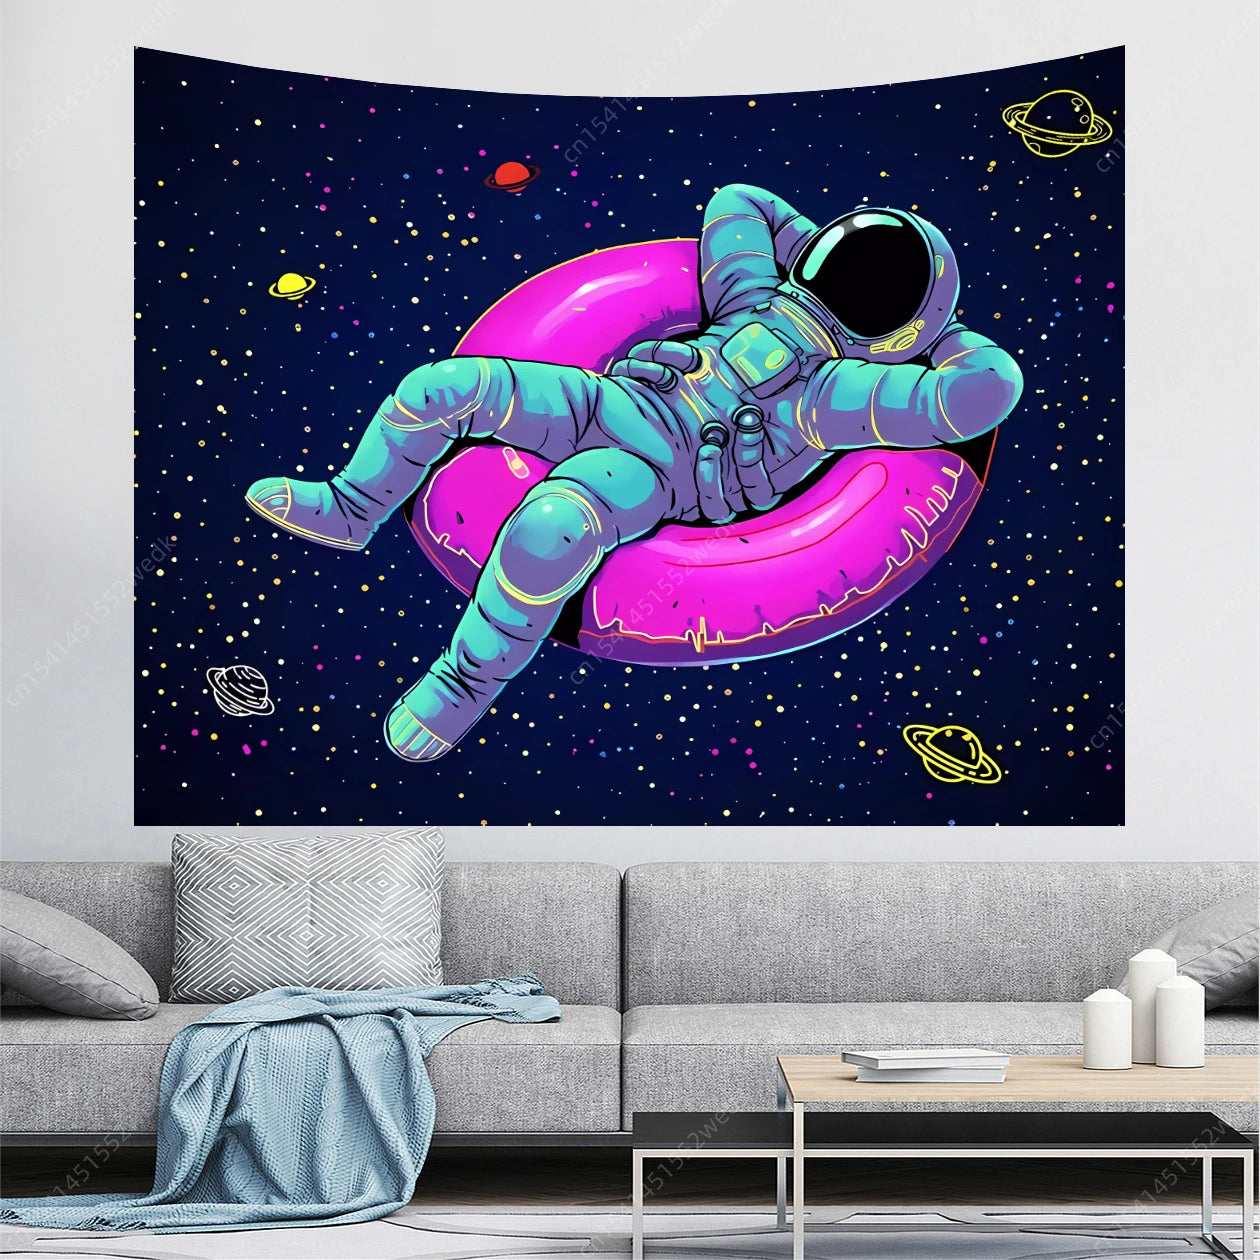 Space Astronaut Tapestry Colorful Stars Galaxy Tapestries Wall Hanging Planet Tapestry Bedroom Decor Aesthetic Background